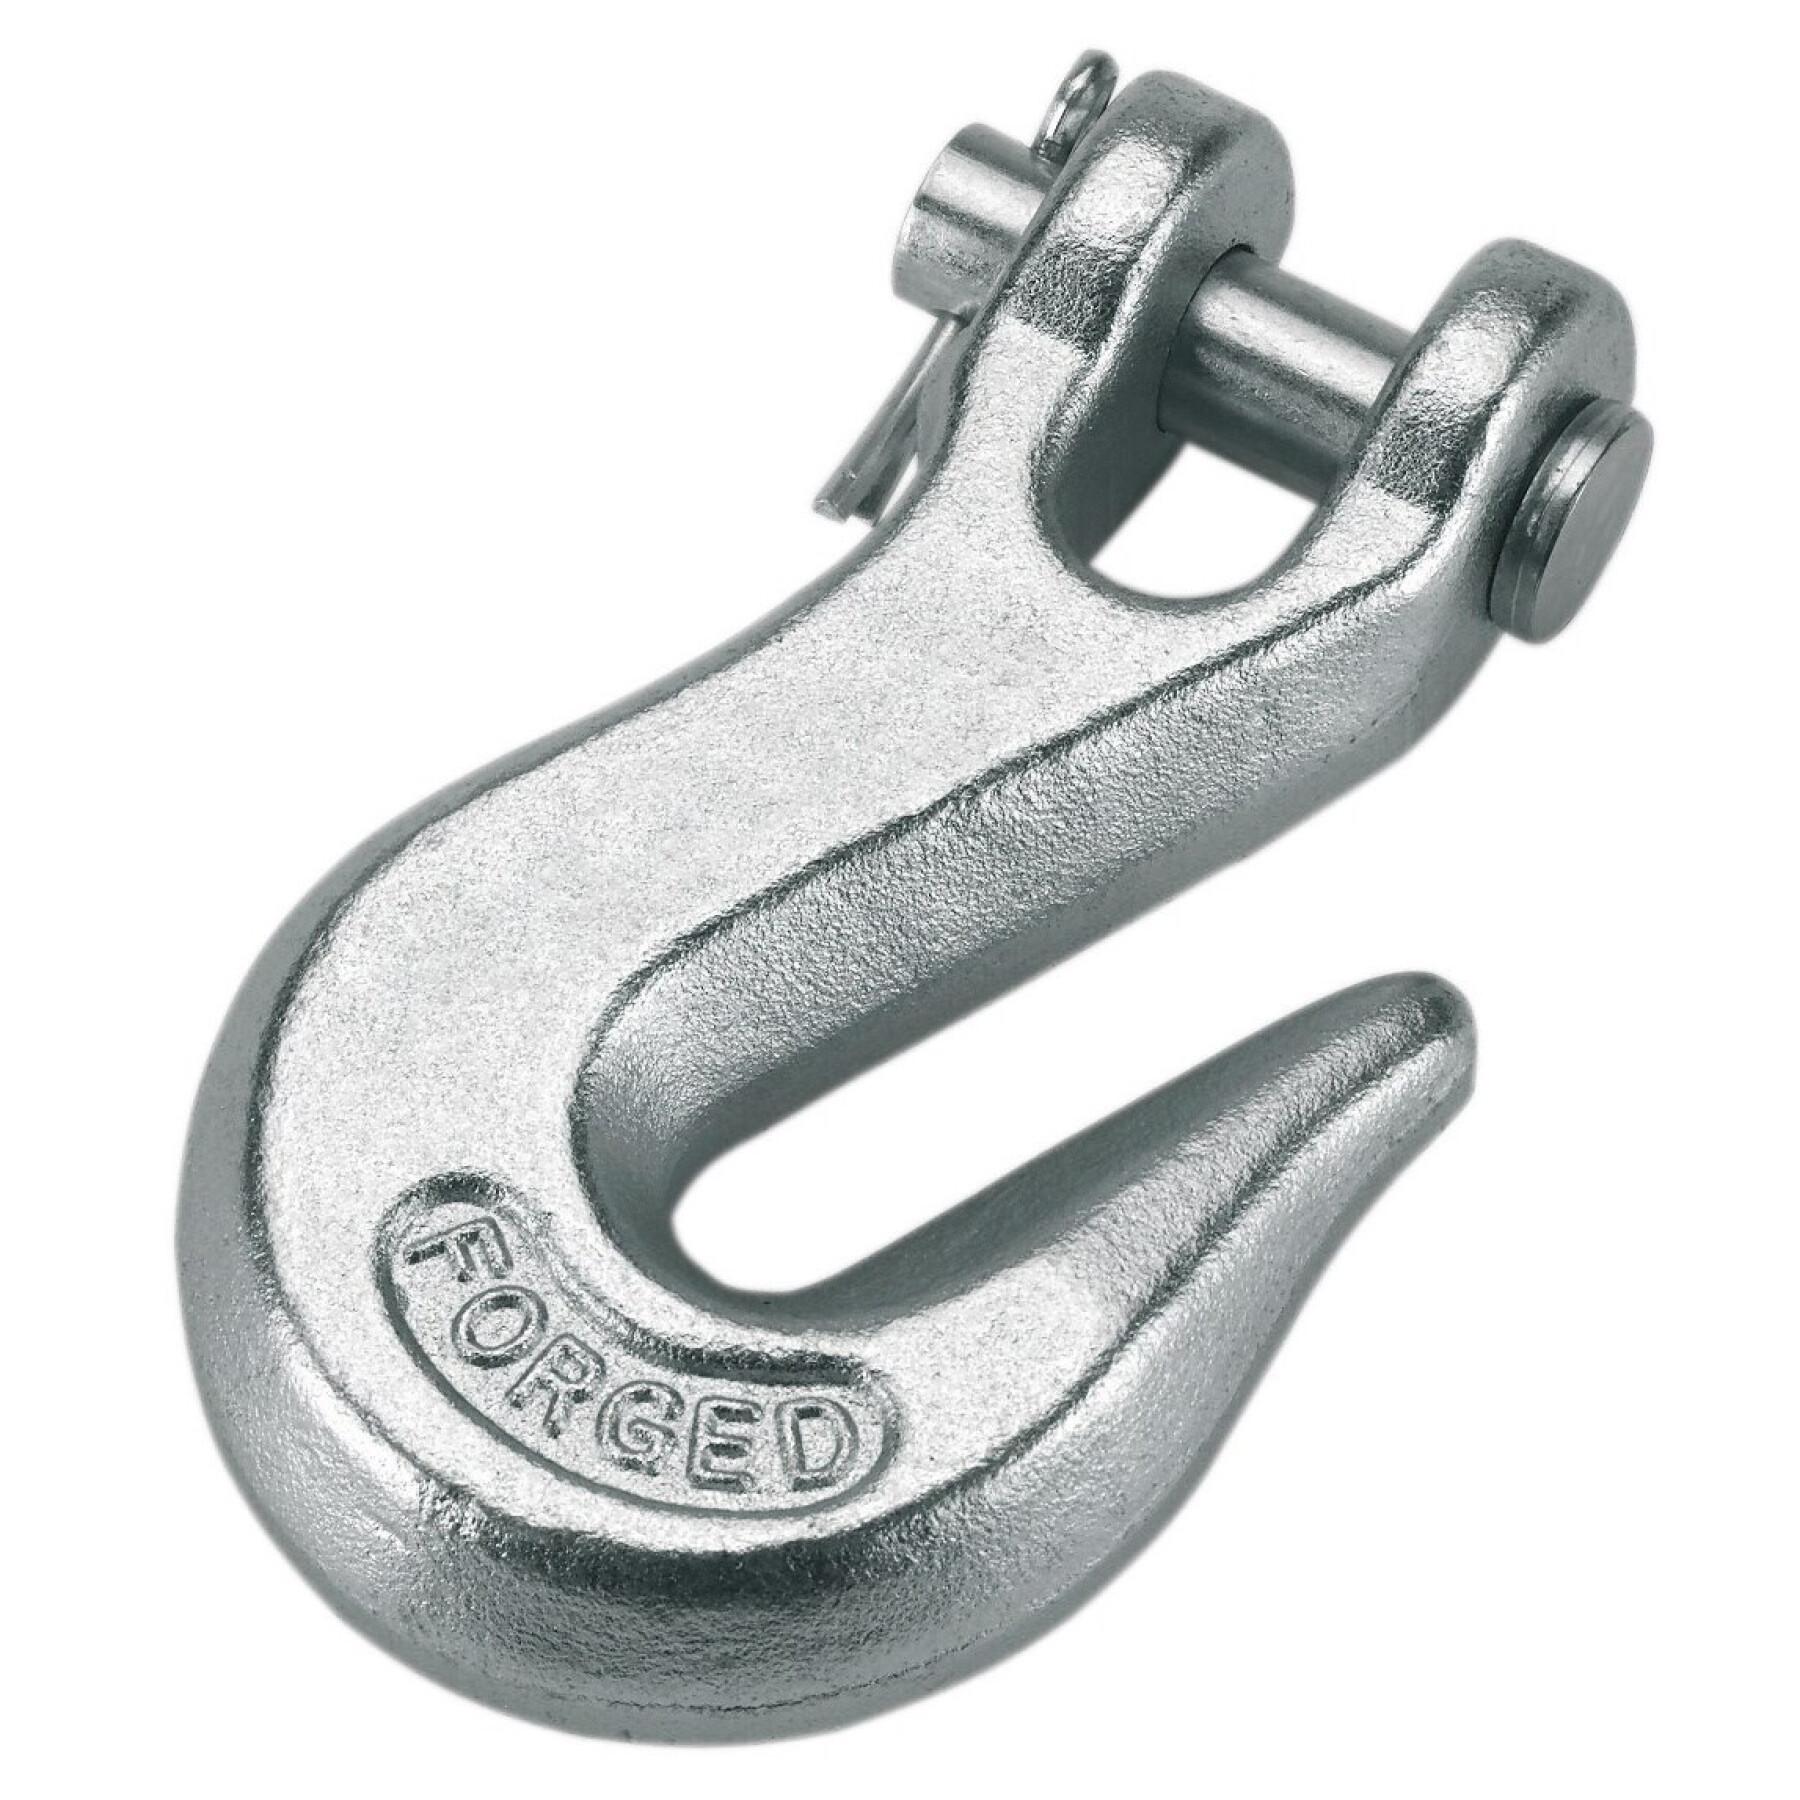 Lifting hook with chain pin - load 1800 kg Kerbl - Attachments - Cattle -  Breeding